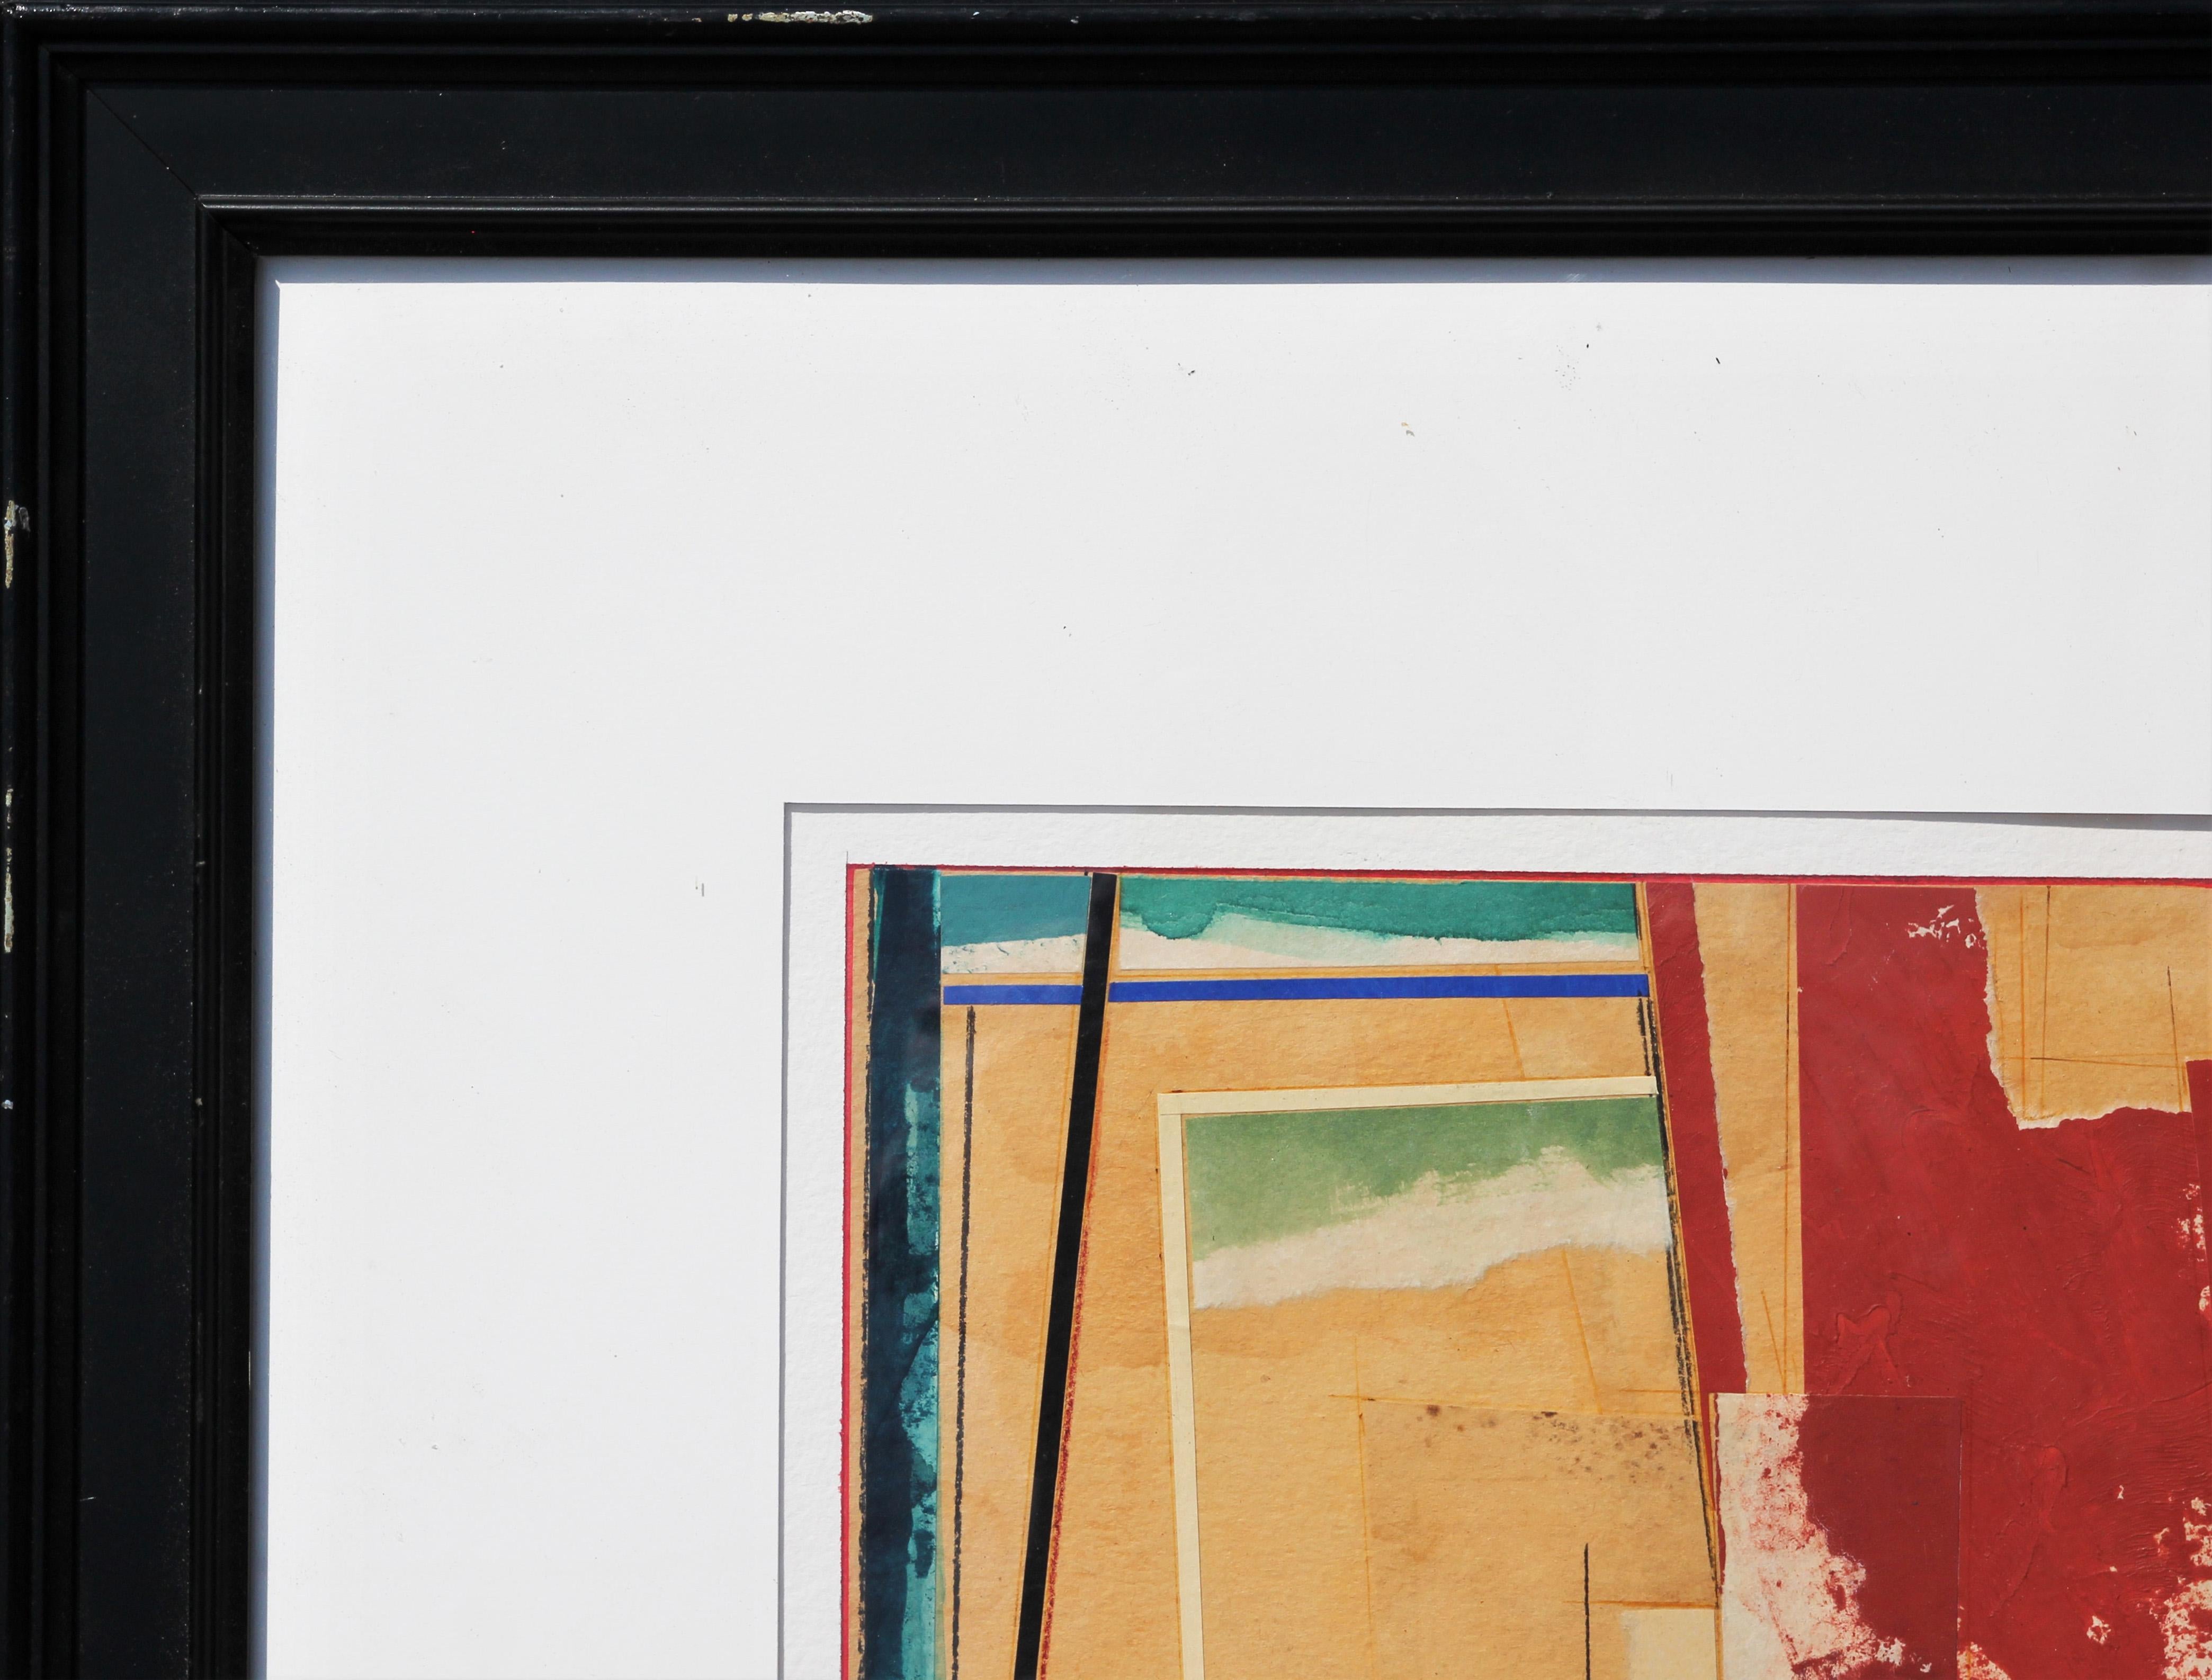 Large geometric mixed media collage painting by Texas artist John Pavlicek. The piece features layers of red, yellow, and green paint and paper to create depth. Signed by artist in front lower right corner. Currently hung in a black frame with white